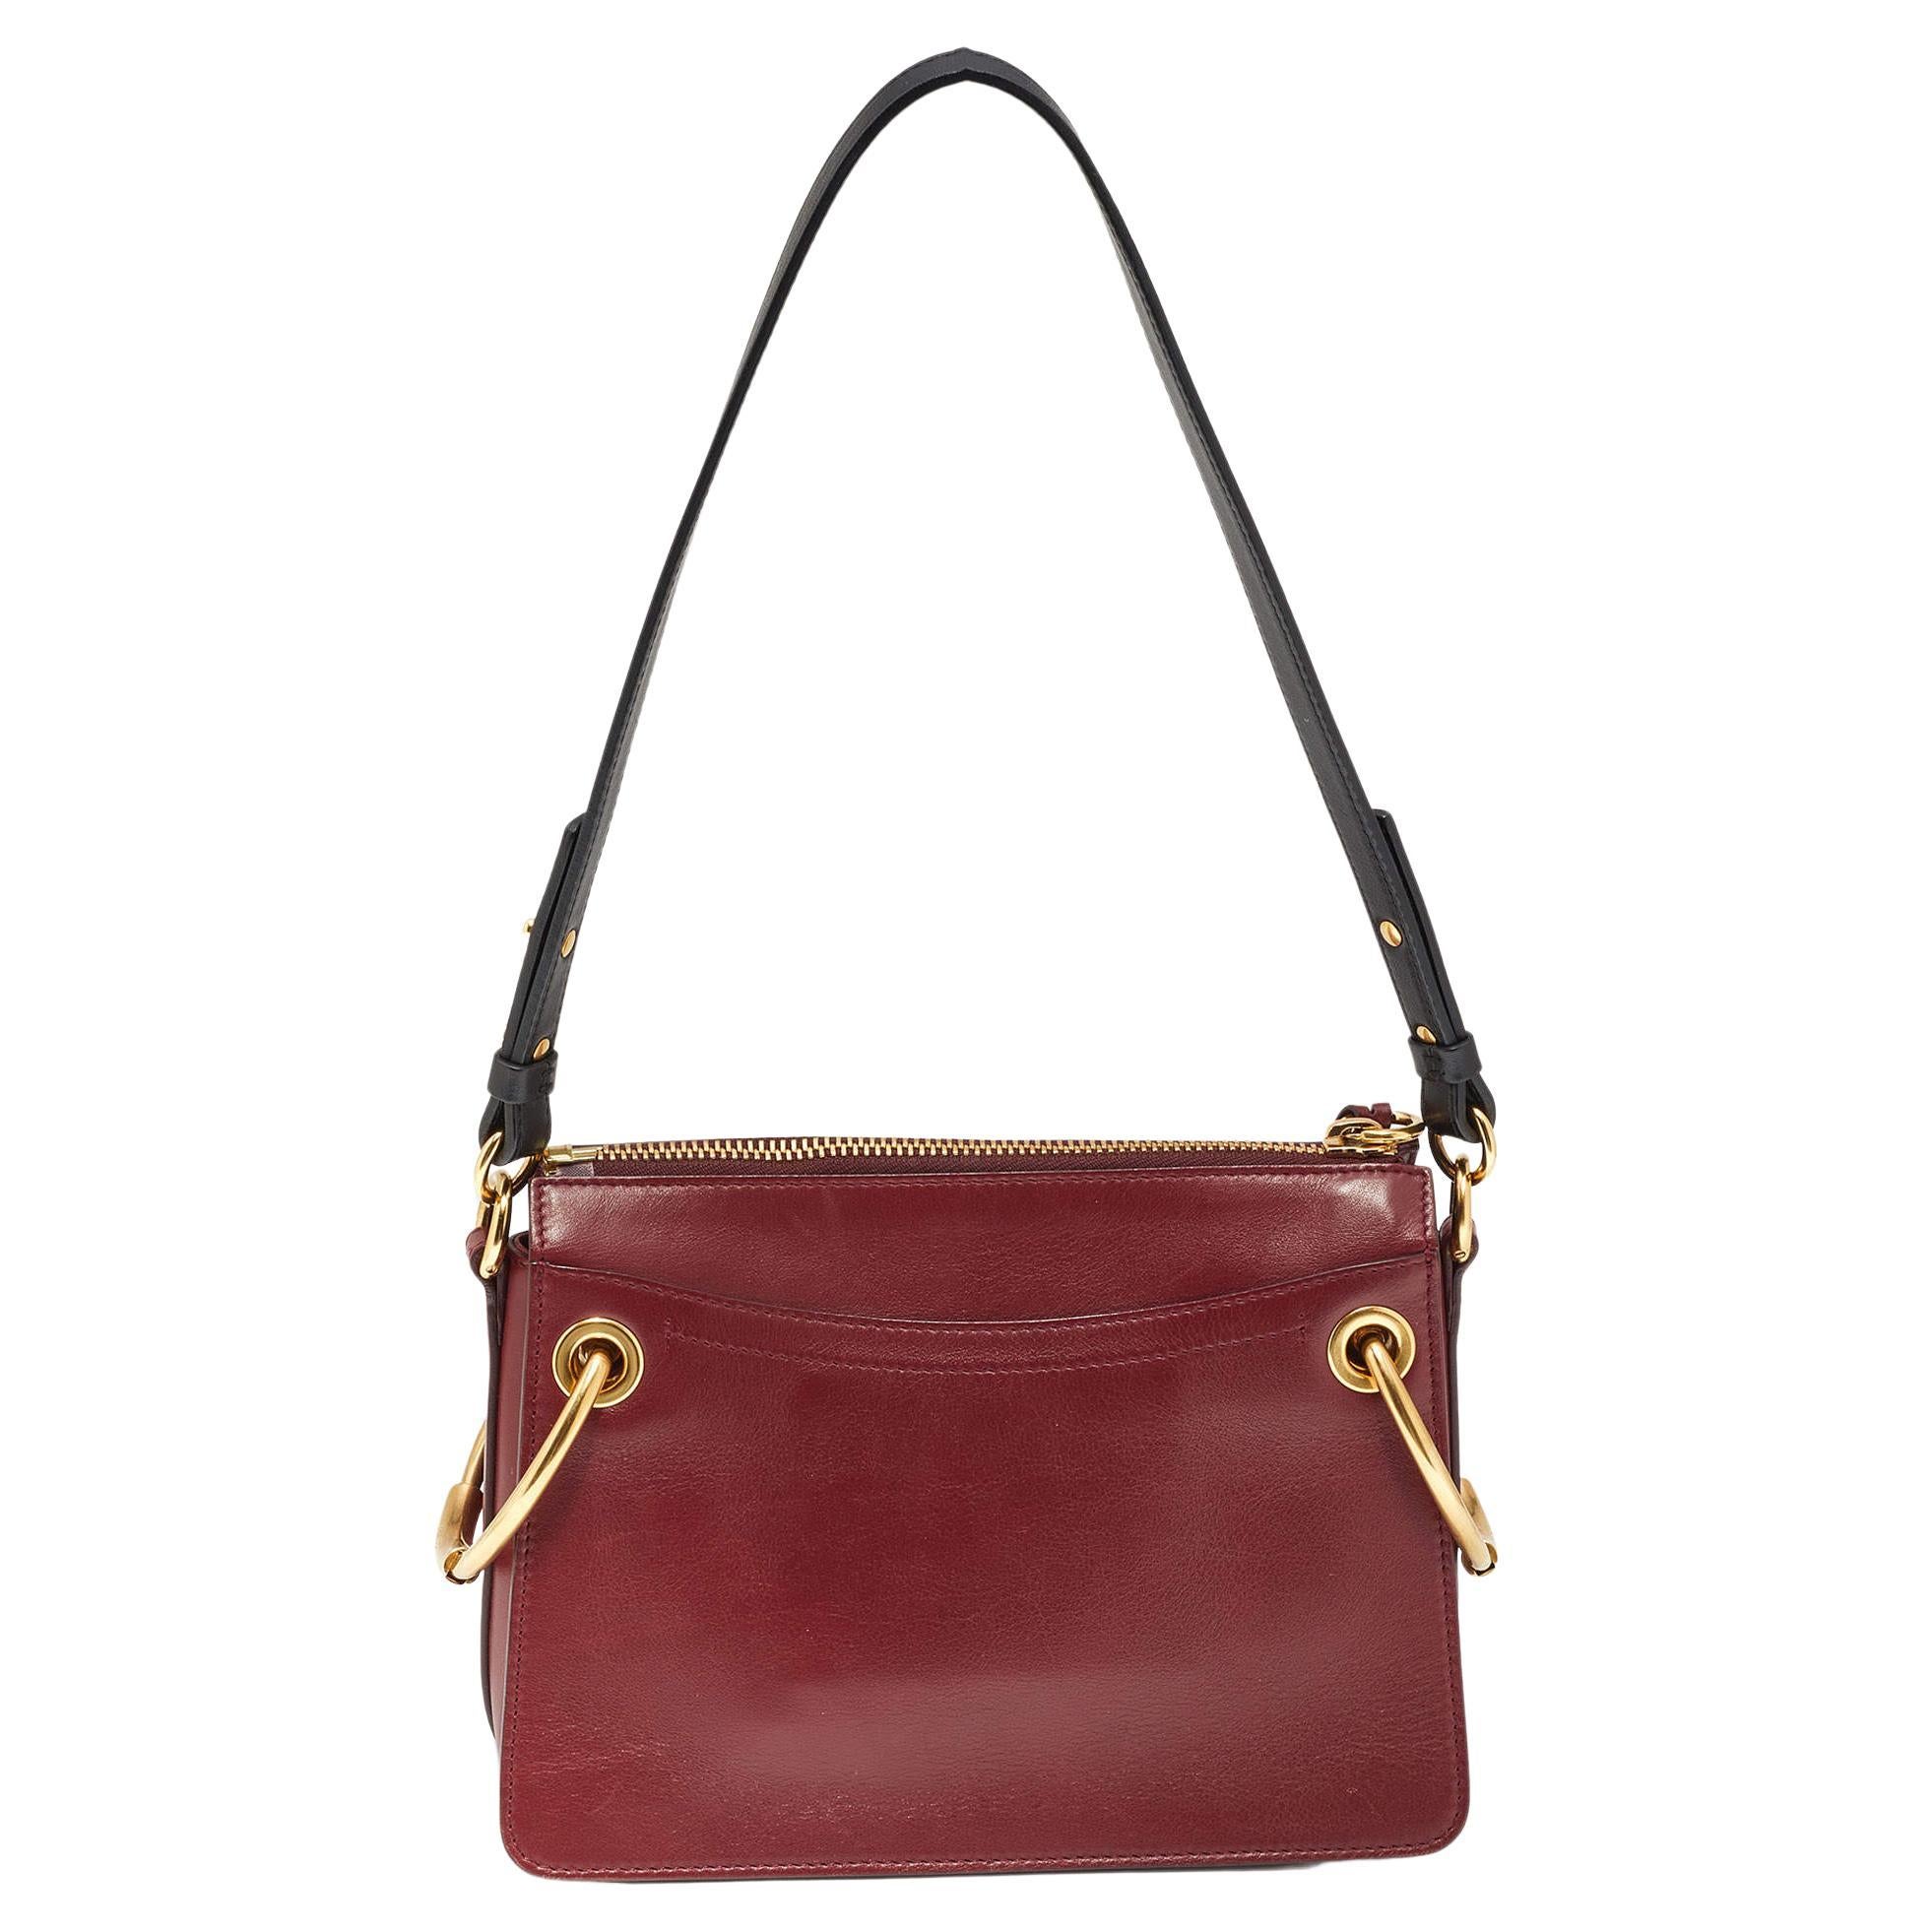 Chloe Maroon Leather and Suede Small Roy Shoulder Bag